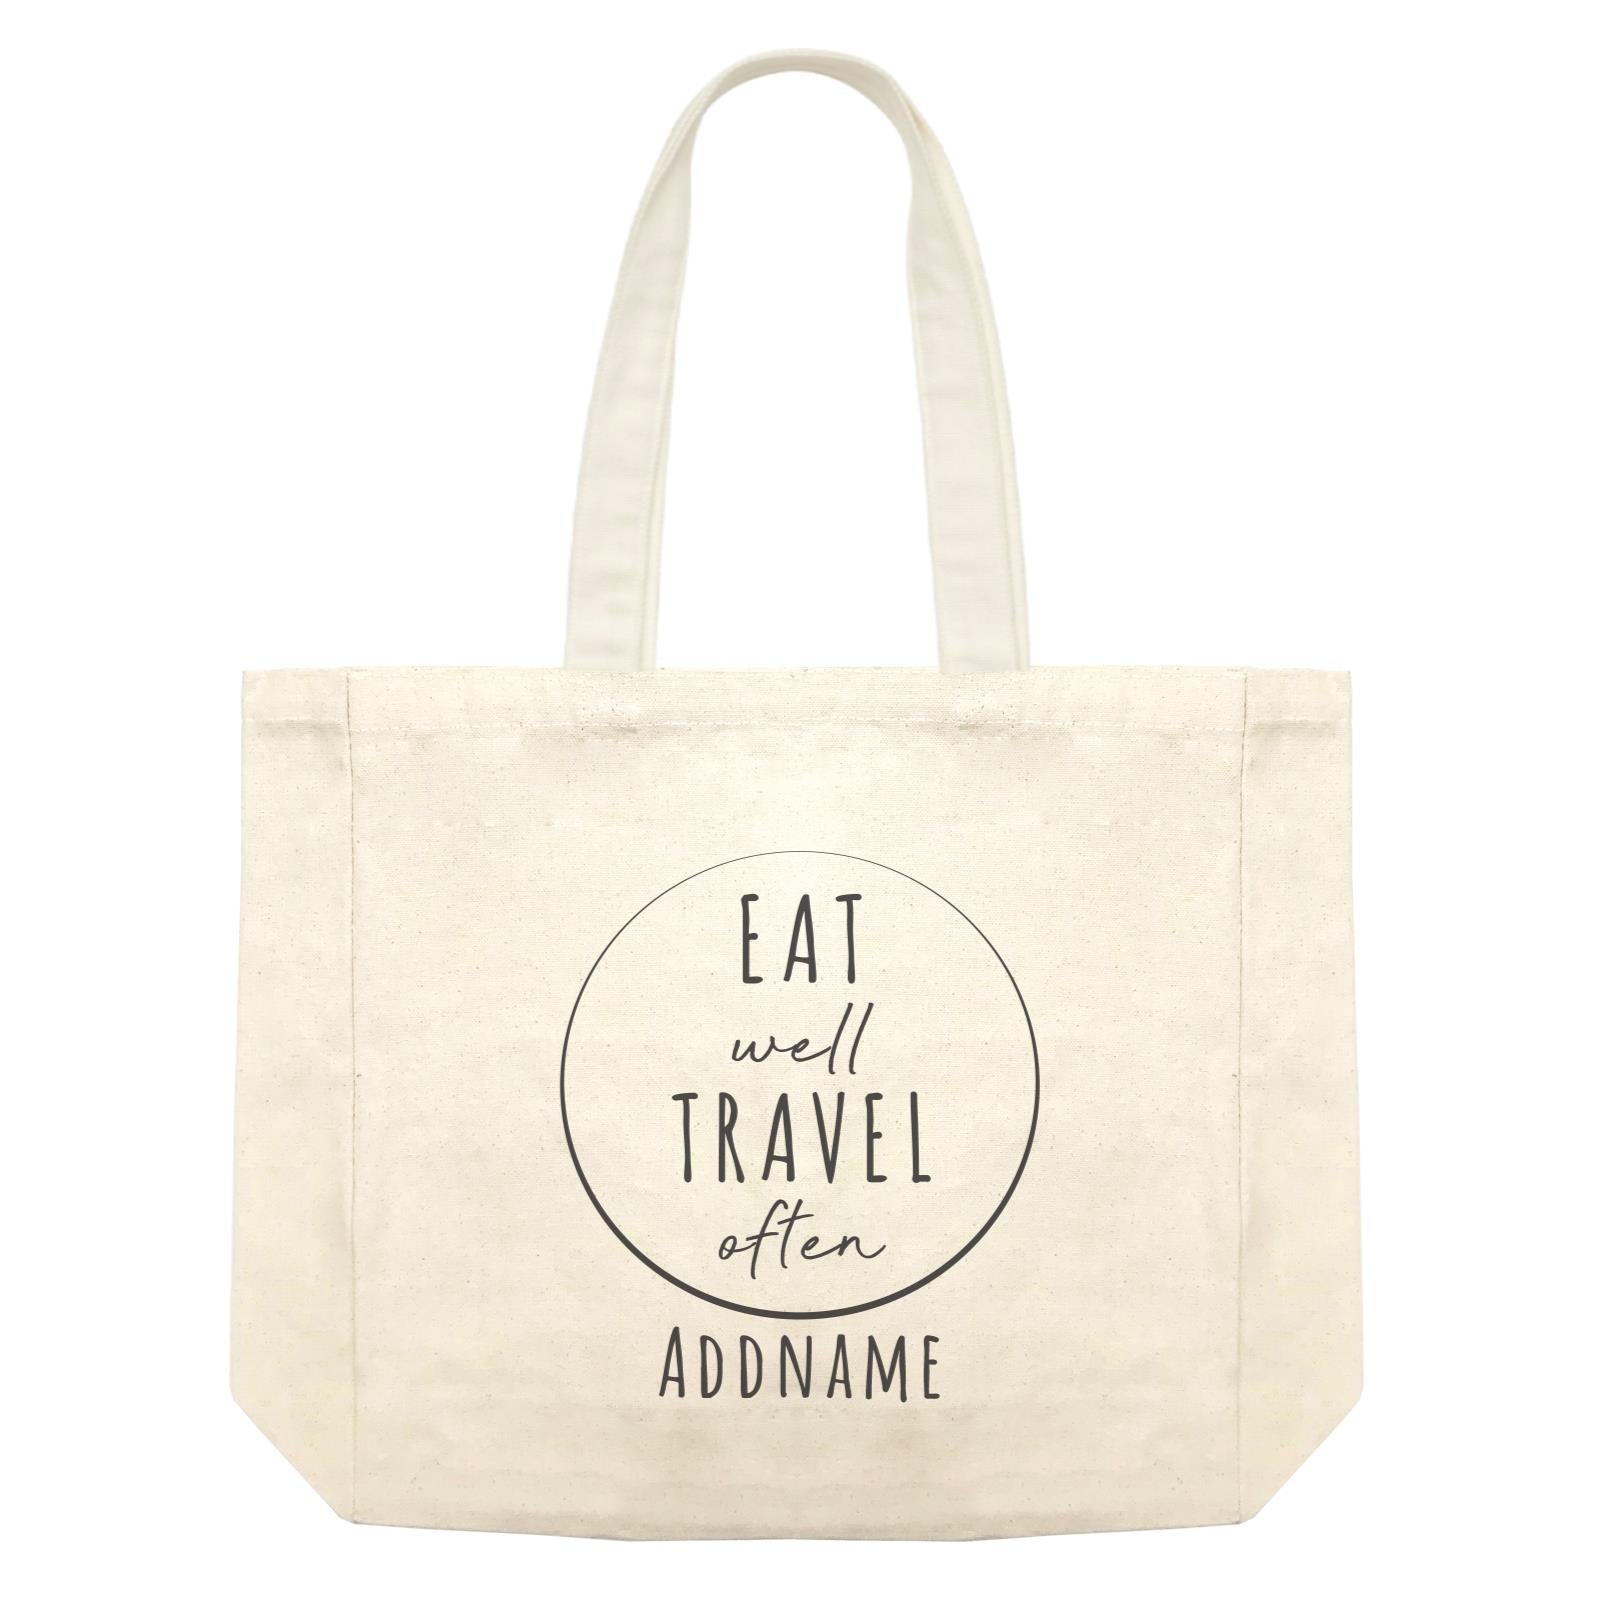 Travel Quotes Eat Well Travel Often Addname Shopping Bag